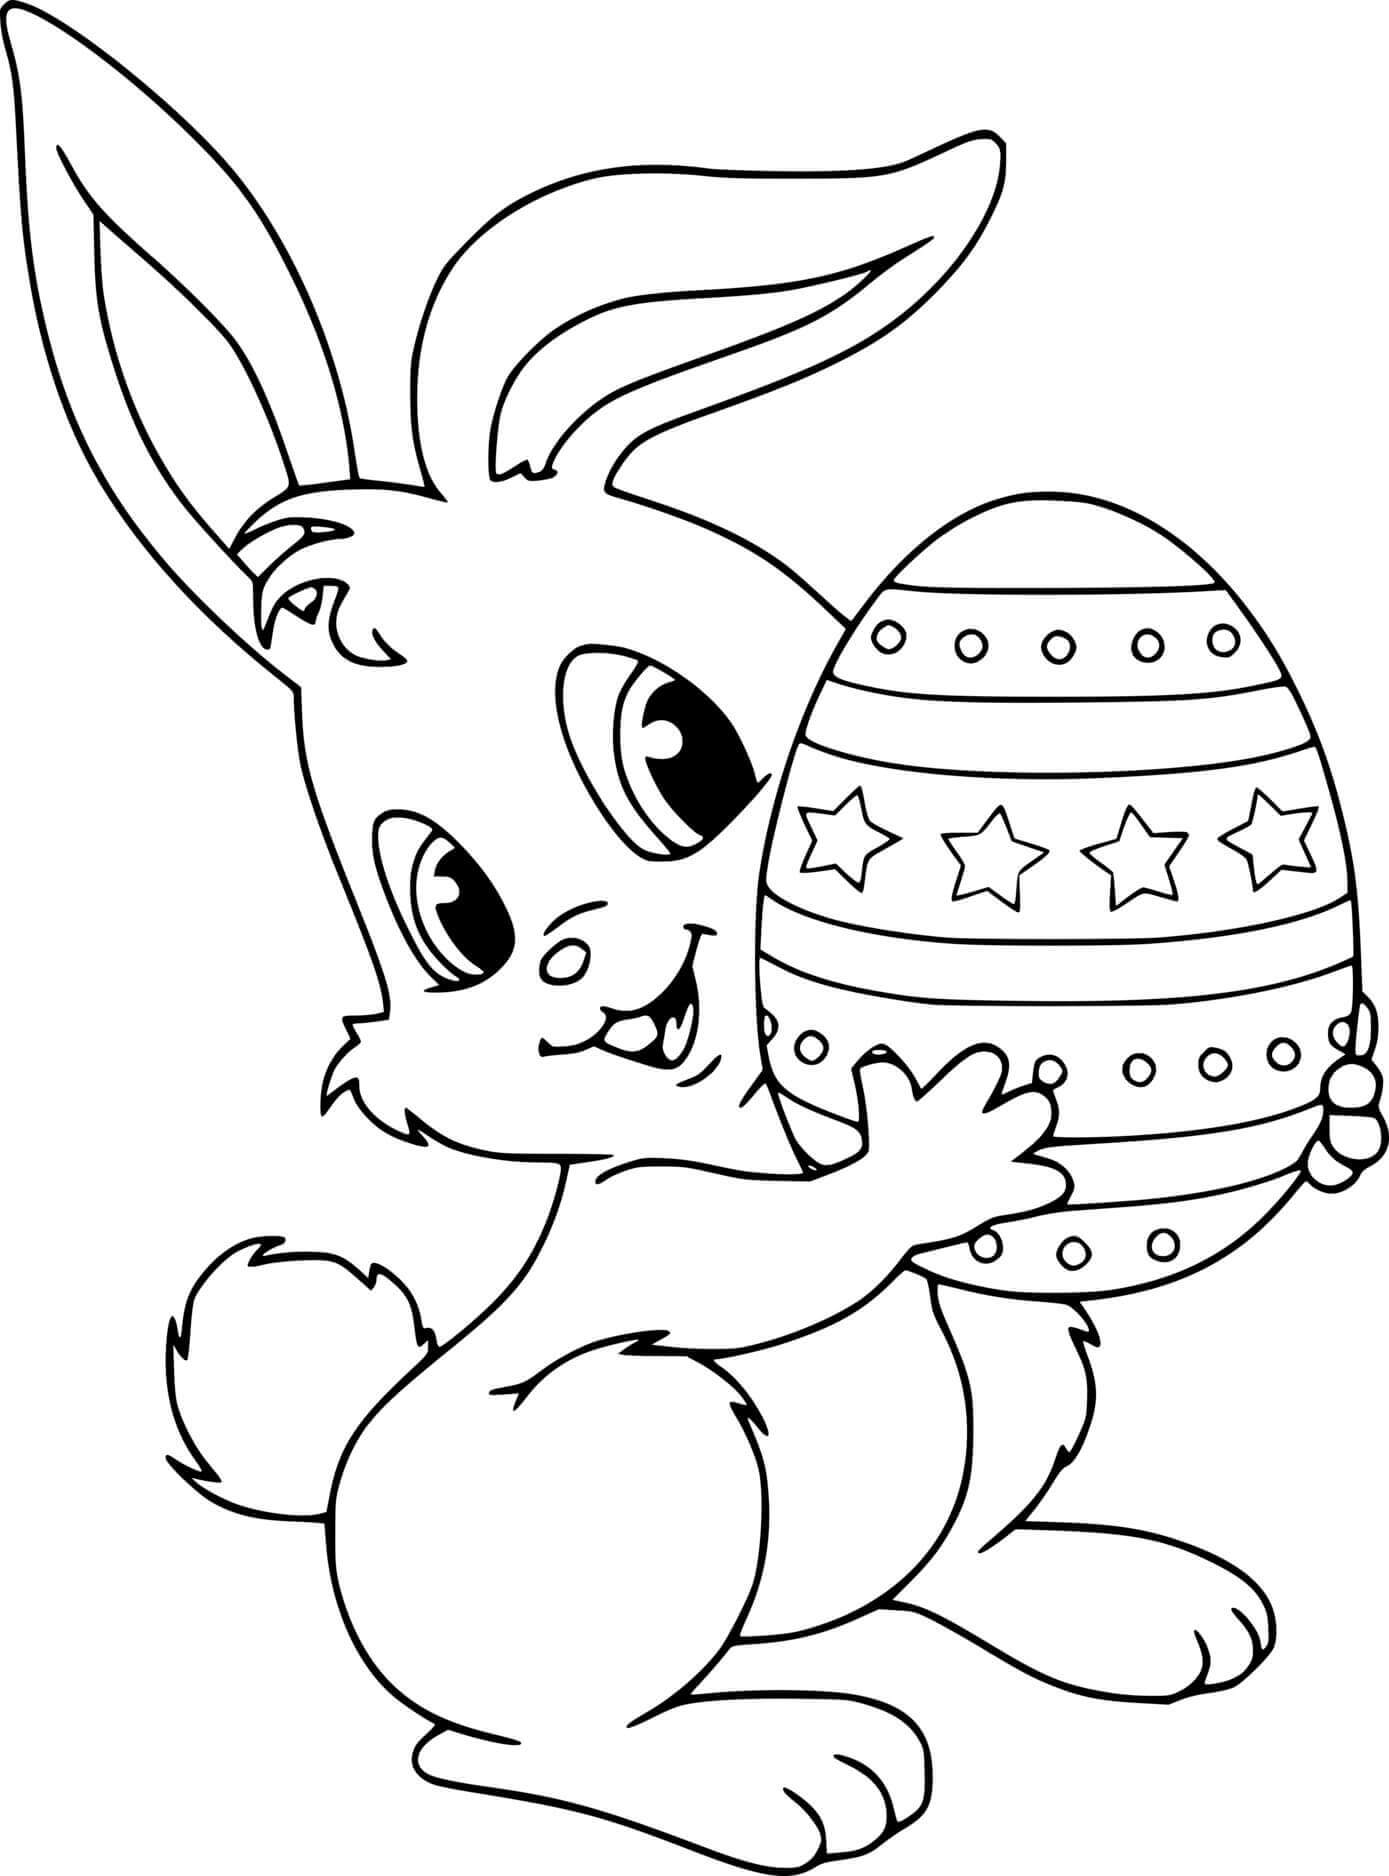 Cute Bunny Holds A Big Easter Egg Coloring Page